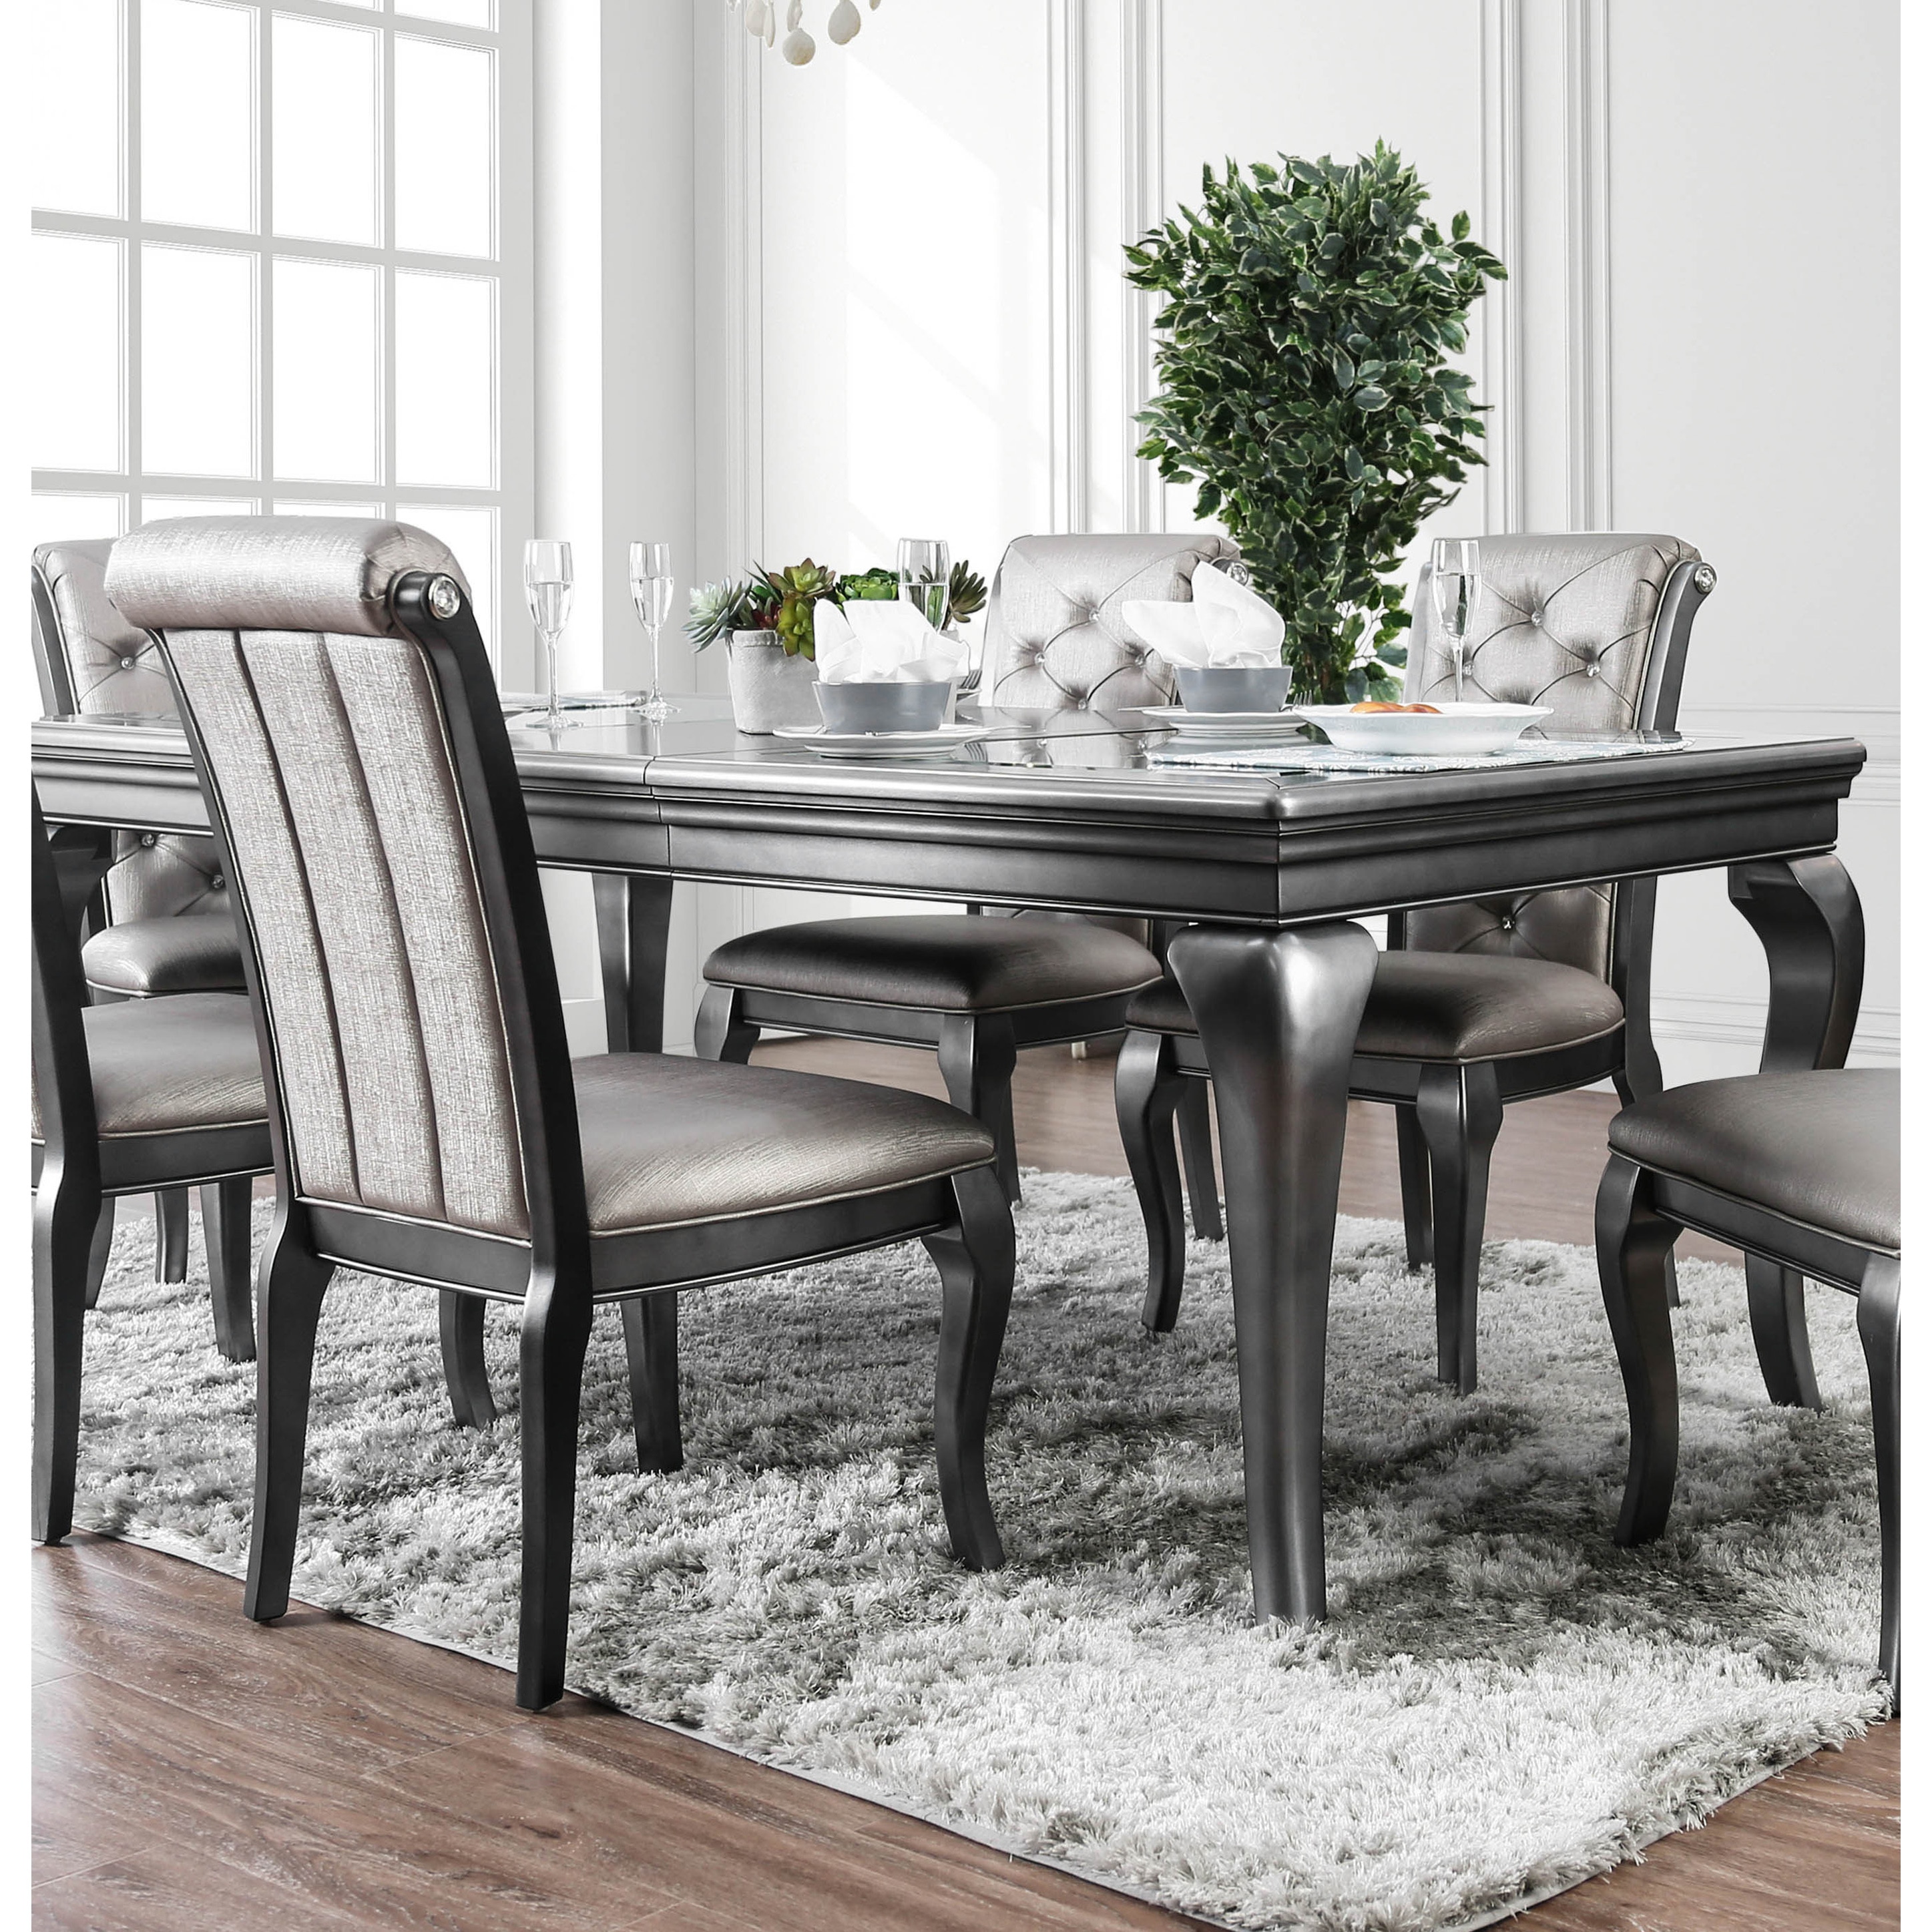 Furniture Of America Tily Glam Grey 84 Inch Solid Wood Dining Table On Sale Overstock 21177714